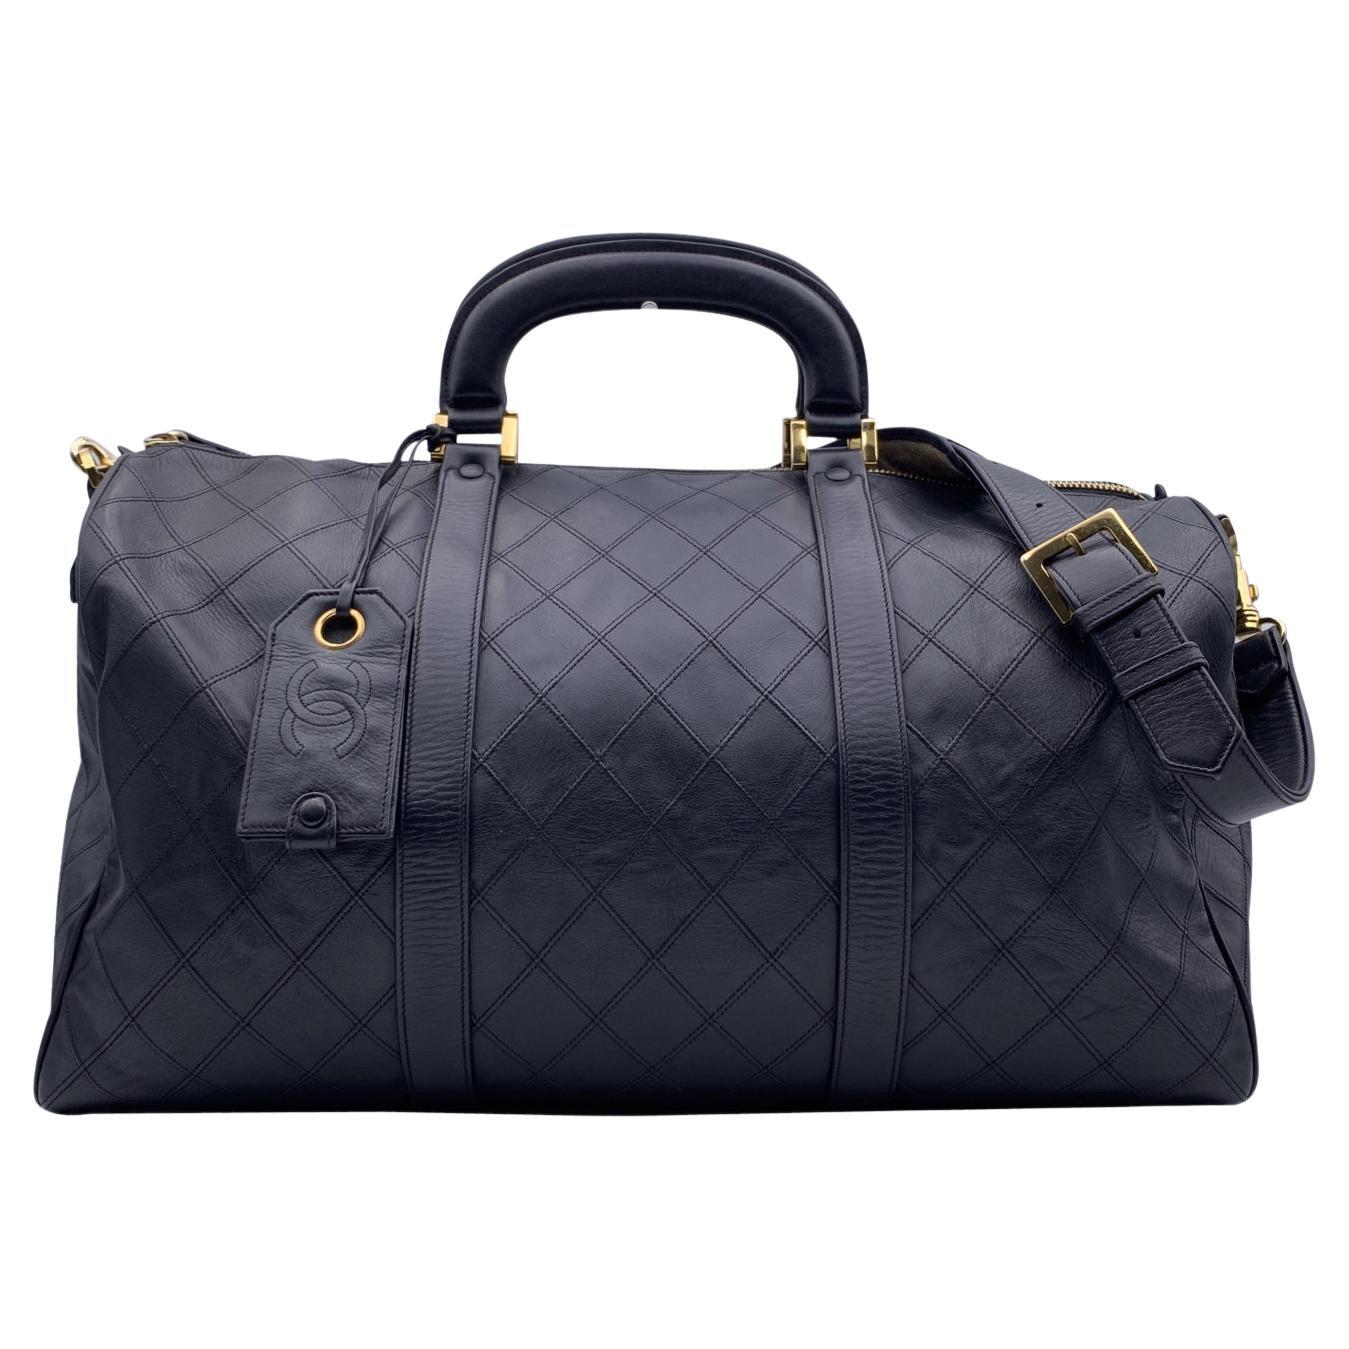 Chanel Black Quilted Leather Large Duffle Bag Weekender with Strap